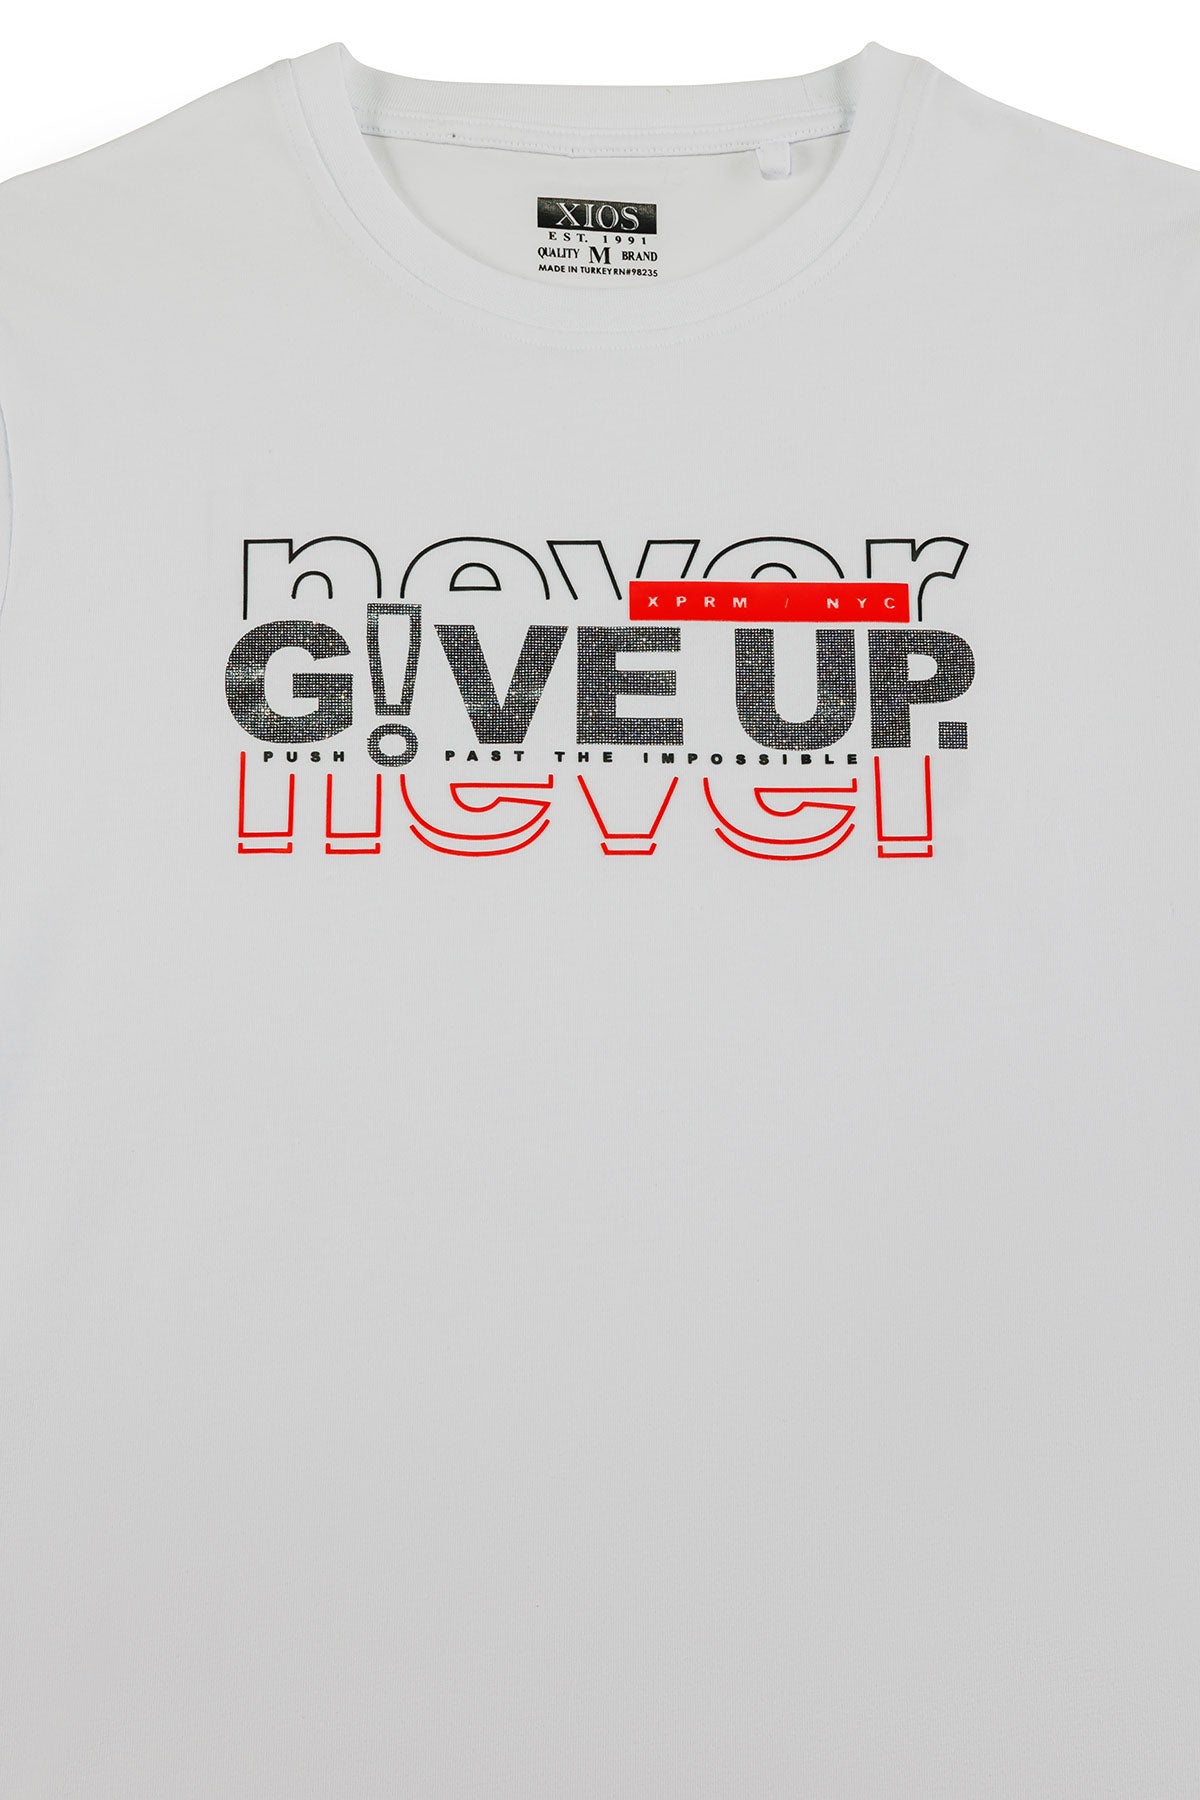 "Never Give Up" Graphic Tee